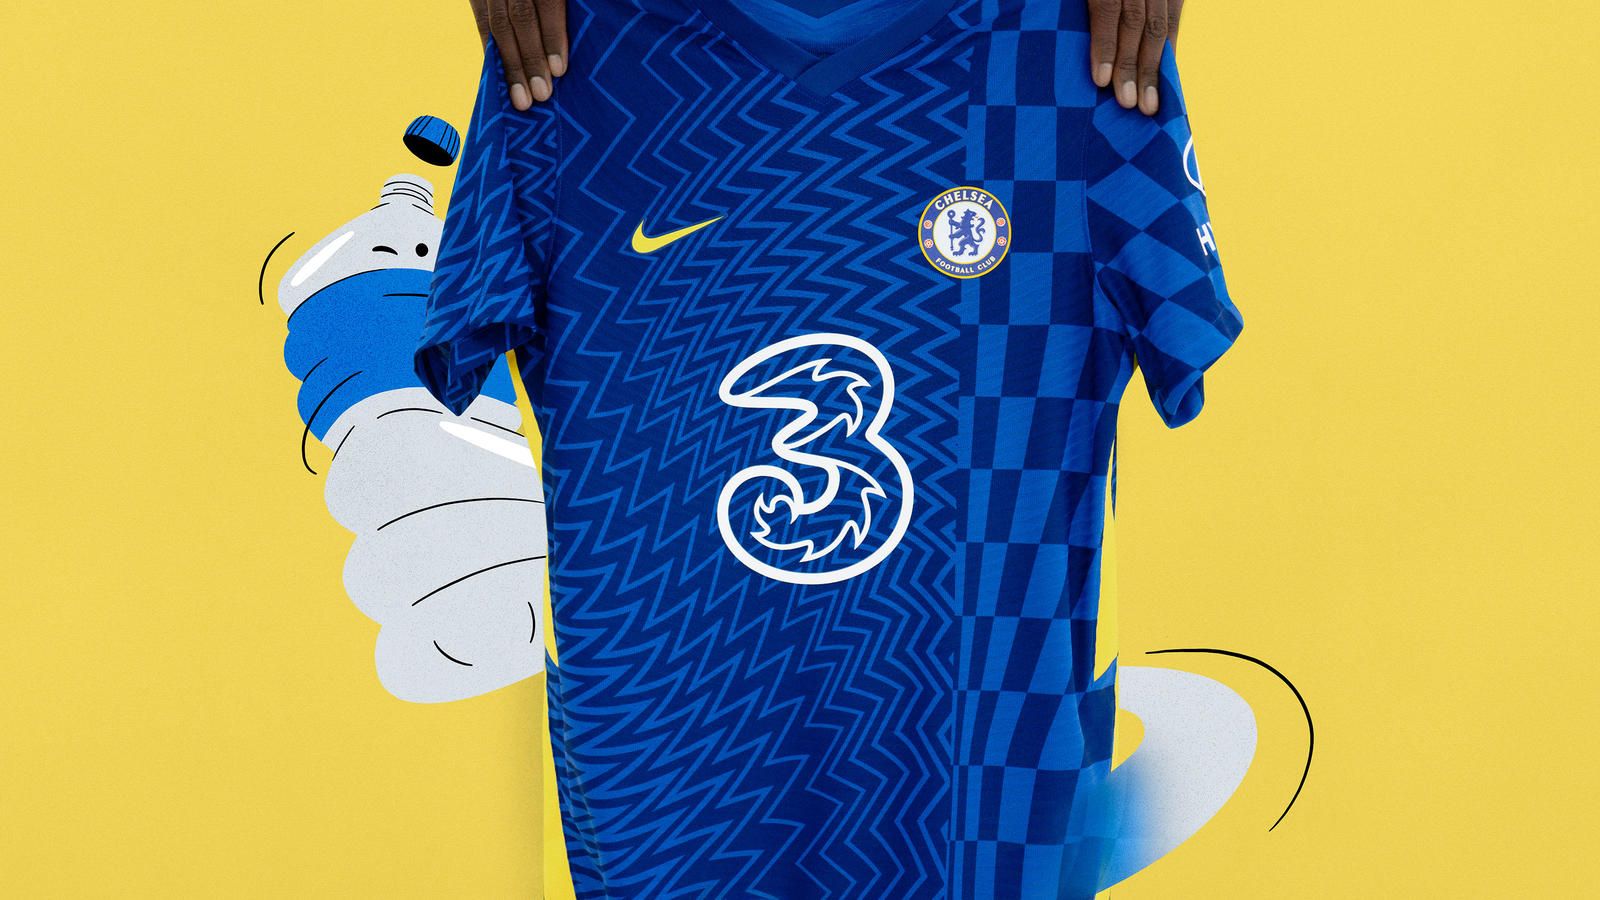 2021 2022 Chelsea Home Kit Official Image Release Date